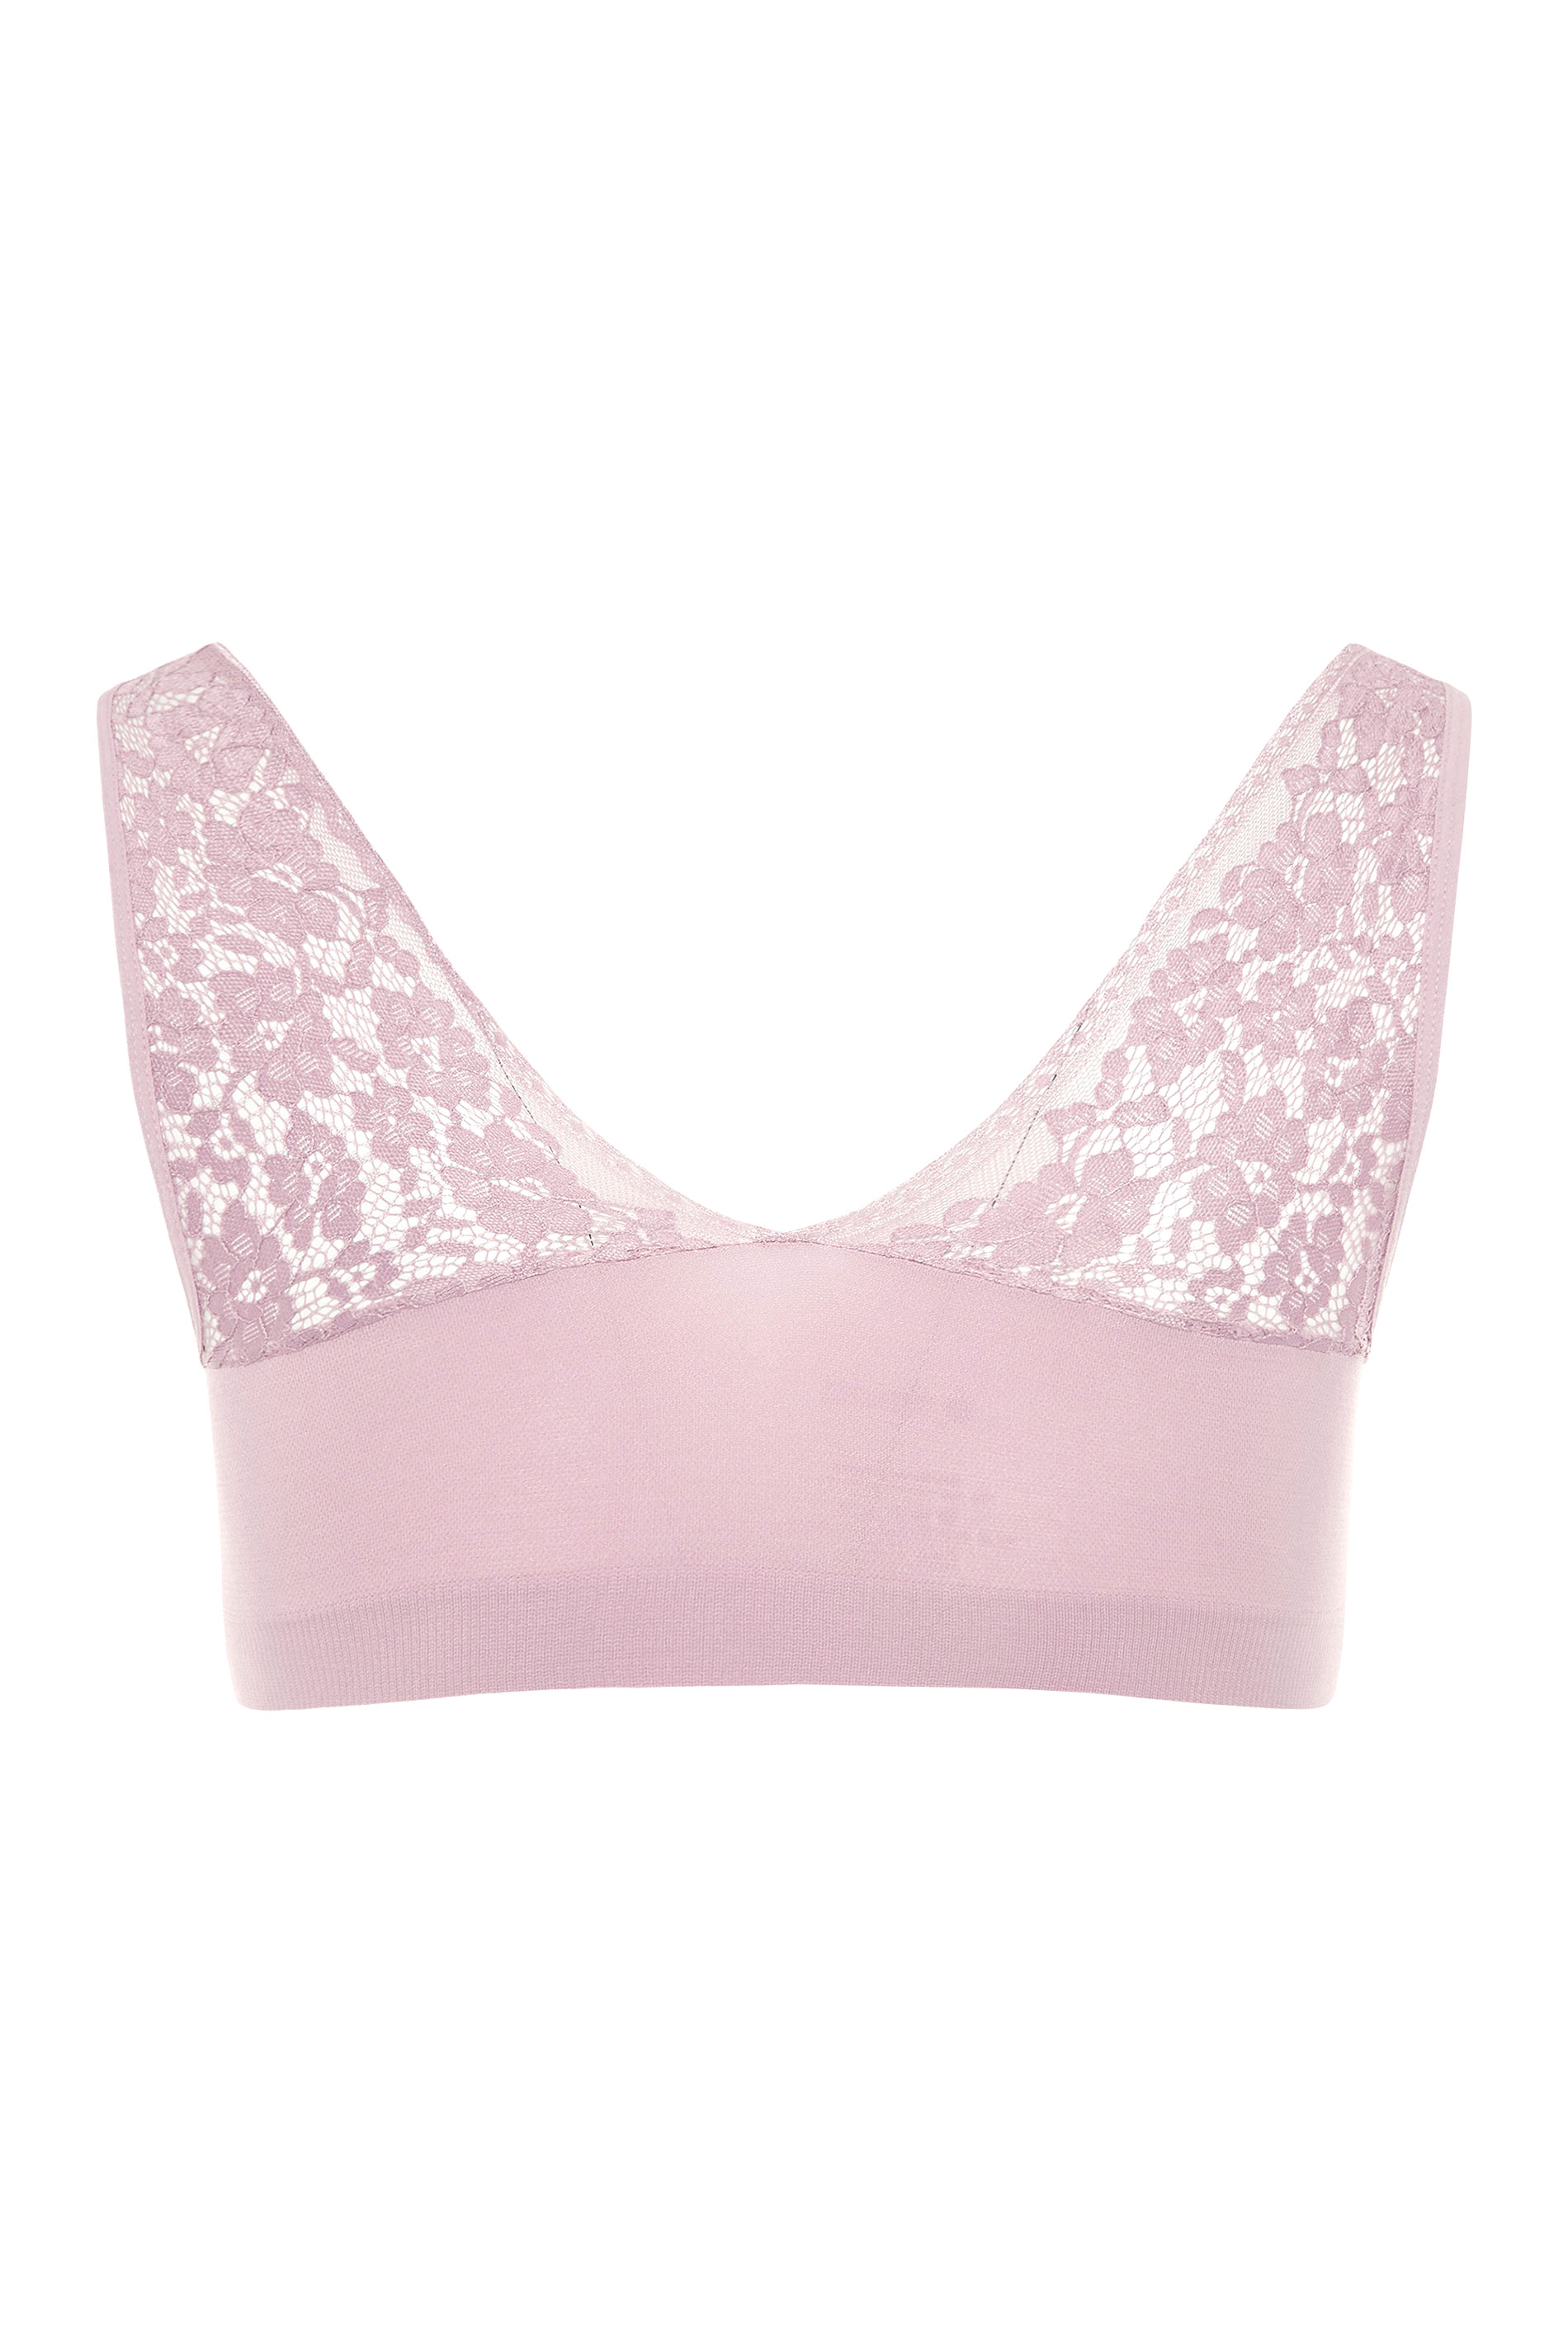 Plus Size Pink Seamless Lace Padded Non-Wired Bralette